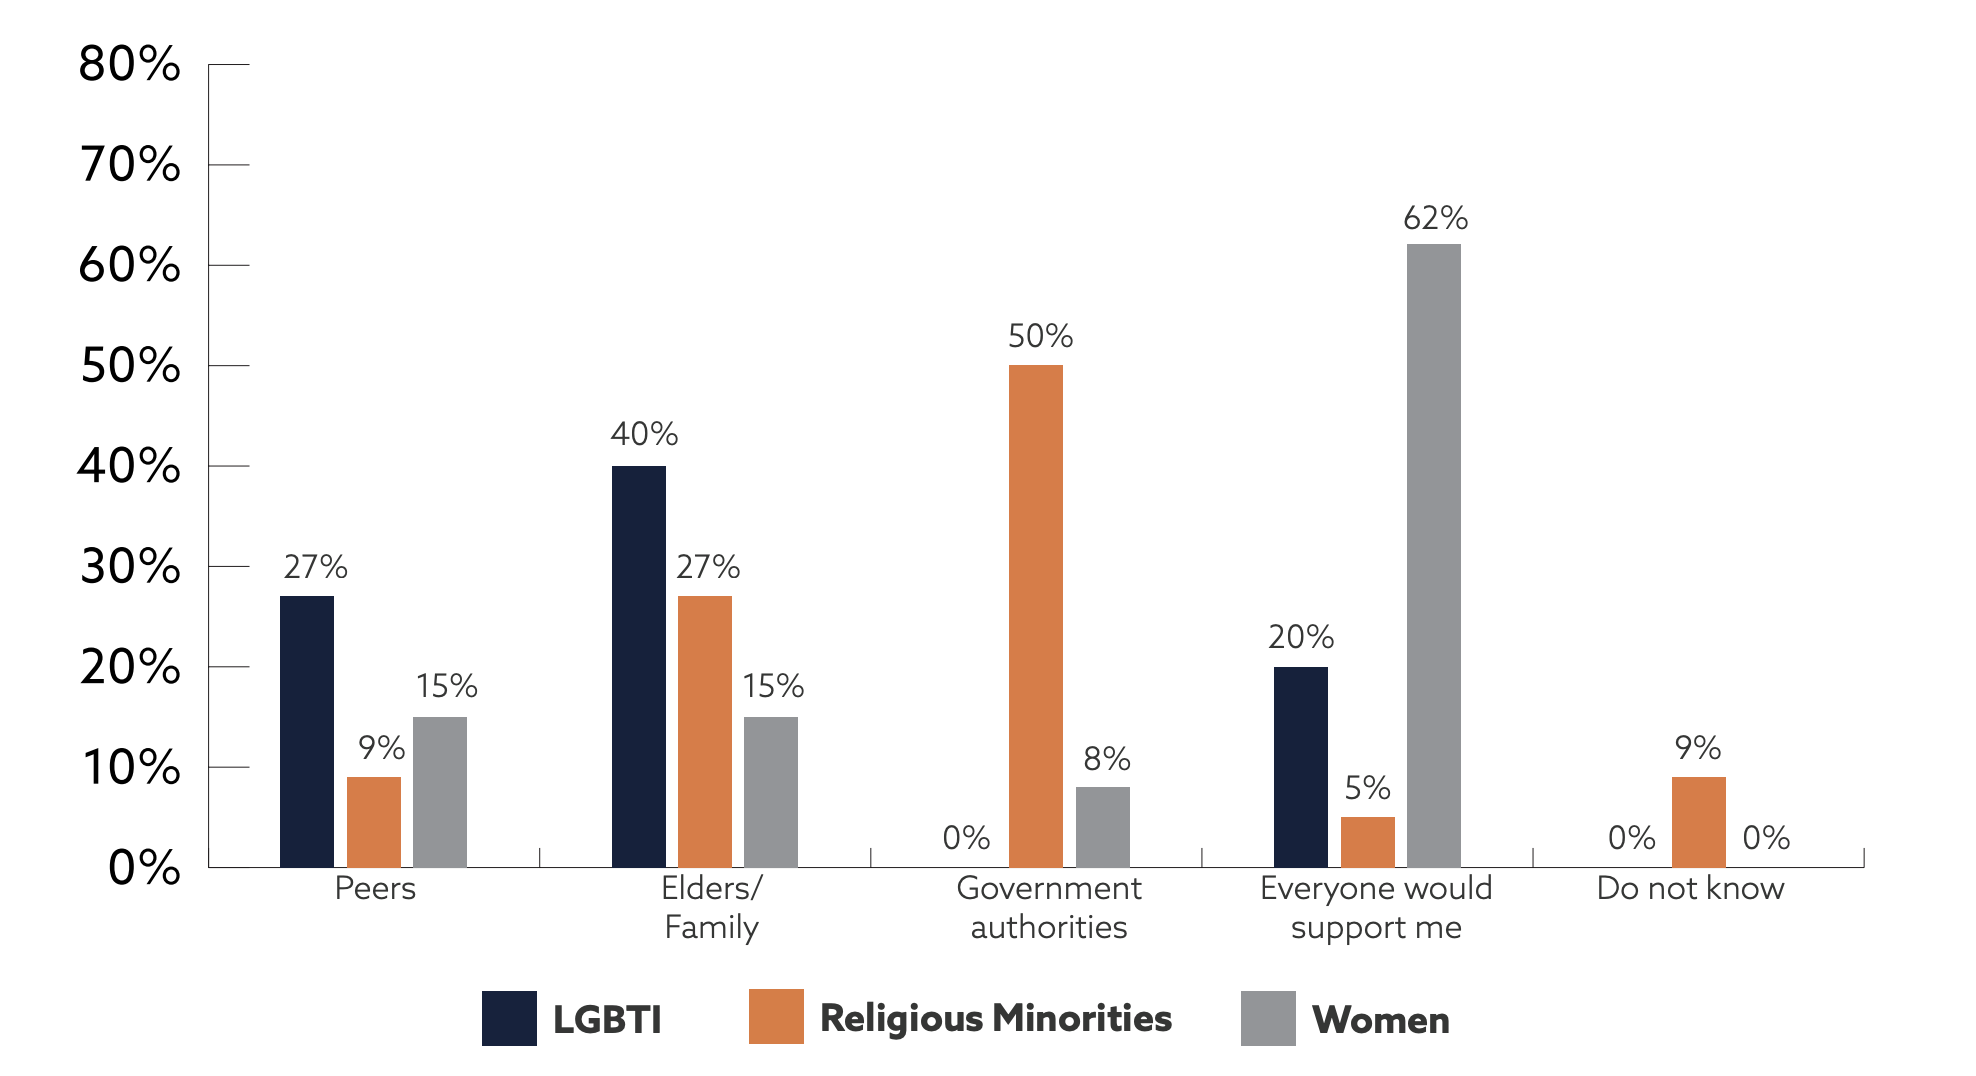 Bar chart.  LGBTI: Peers 27%; Elders/family 40%; Government authorities 0%; Everyone would support me 20%; Do not know 0%.  Religious Minorities: Peers 9%; Elders/family 27%; Government authorities 50%; Everyone would support me 5%; Do not know 9%.  Women: Peers 15%; Elders/family 15%; Government authorities 8%; Everyone would support me 62%; Do not know 0%. 